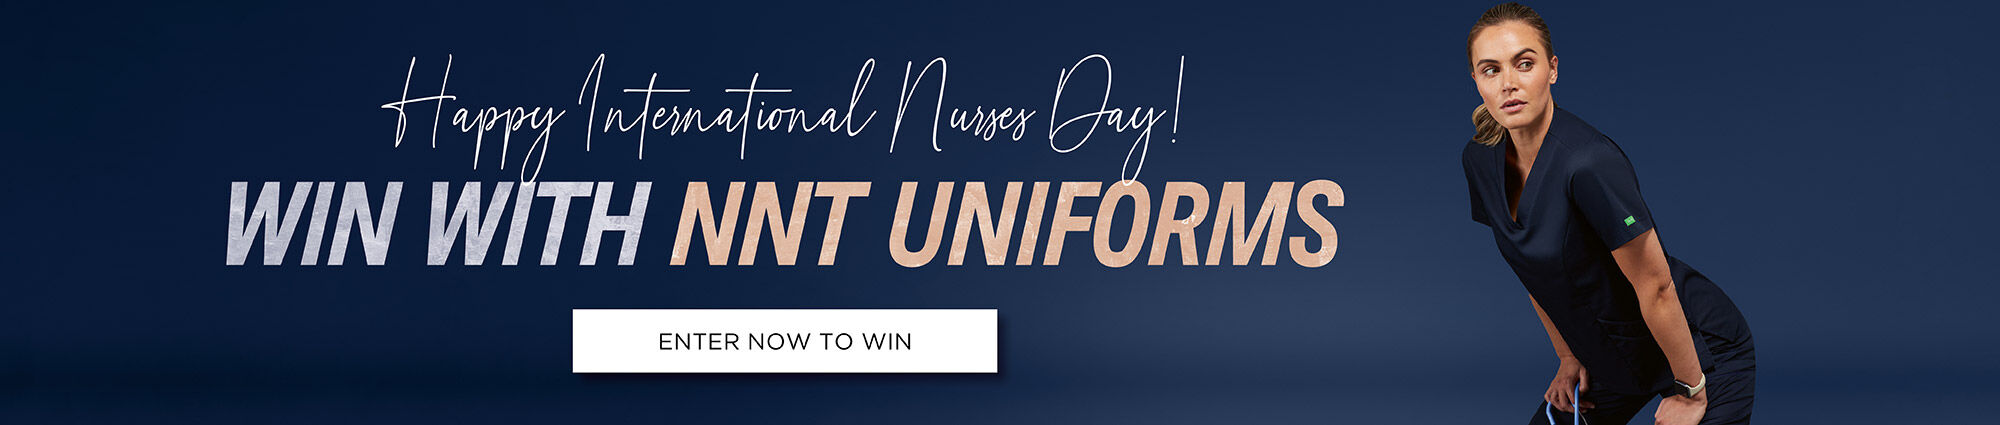 WIN with NNT Uniforms